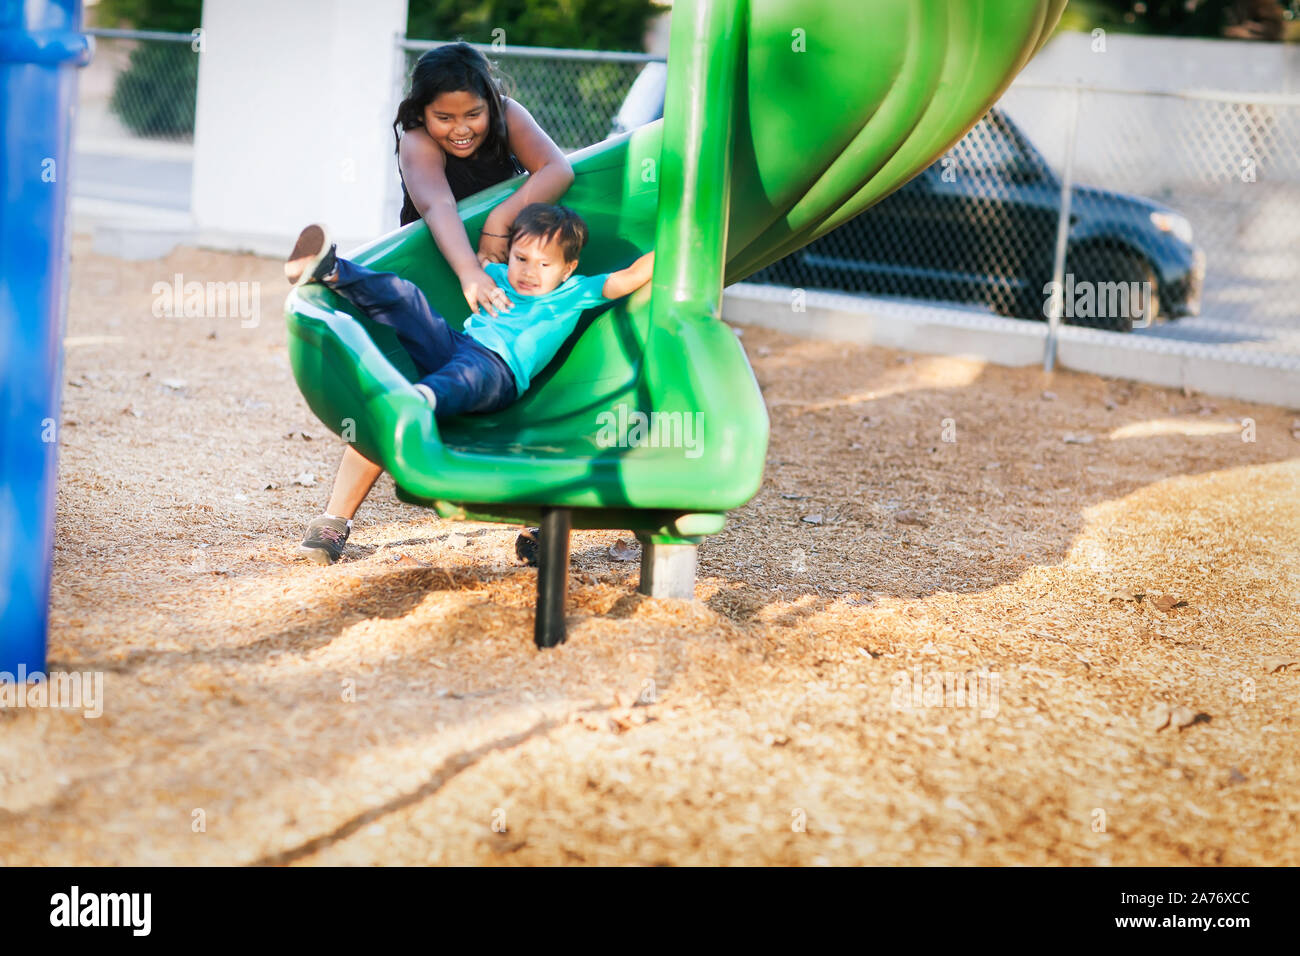 Older sister helping her younger brother go down a twisted slide in a kids playground. Stock Photo